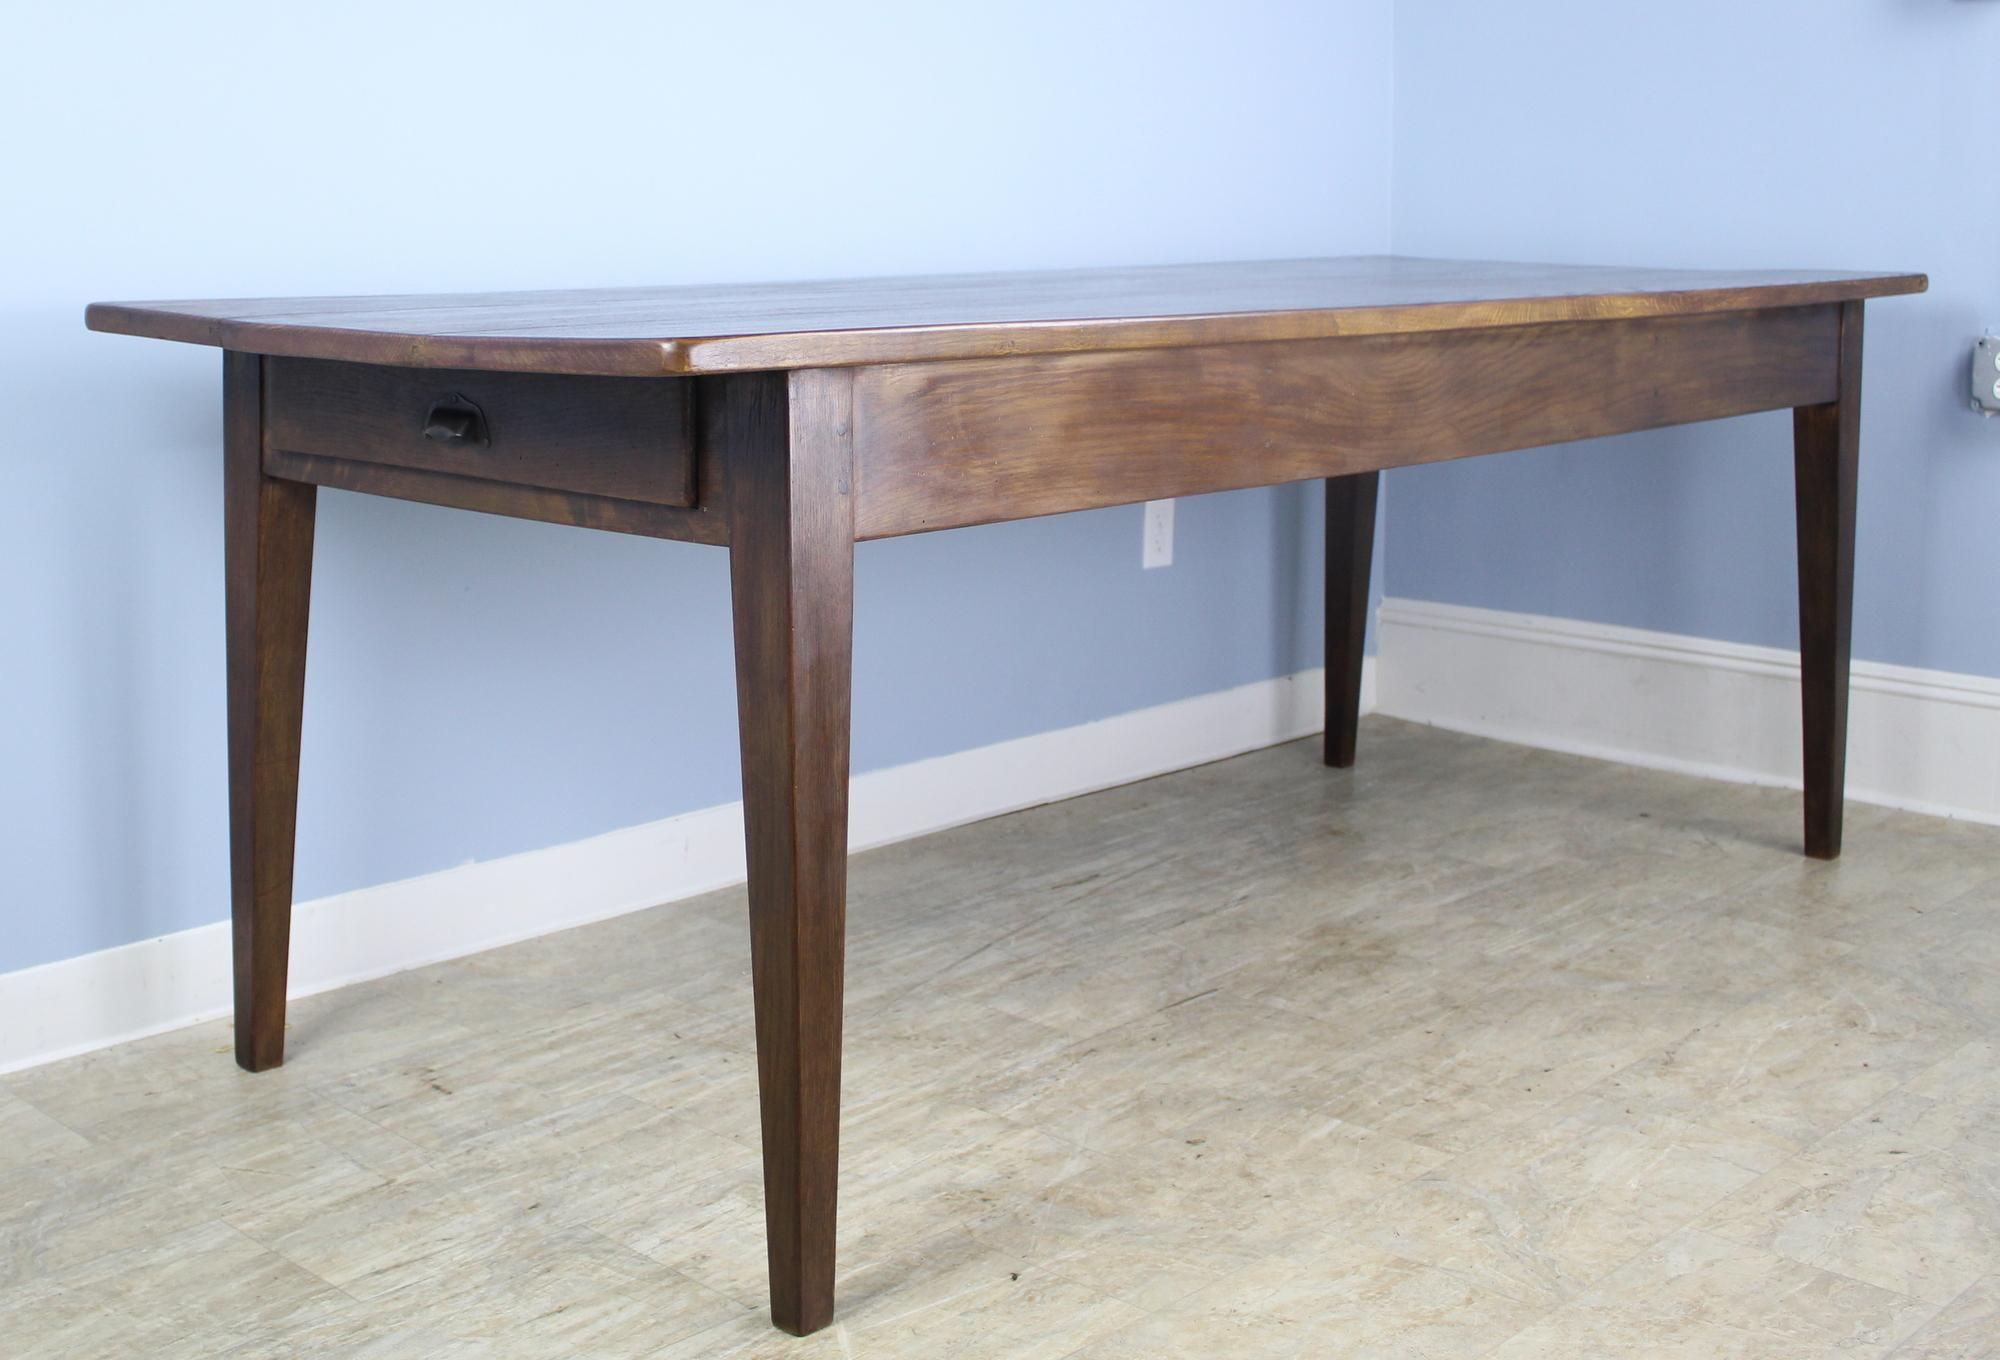 A generously proportioned chestnut farm table, custom made for Briggs House in France. This long table is almost 35 inches deep, providing excellent space for dining. It is very good looking, with dark rich color and dramatic chestnut grain. There